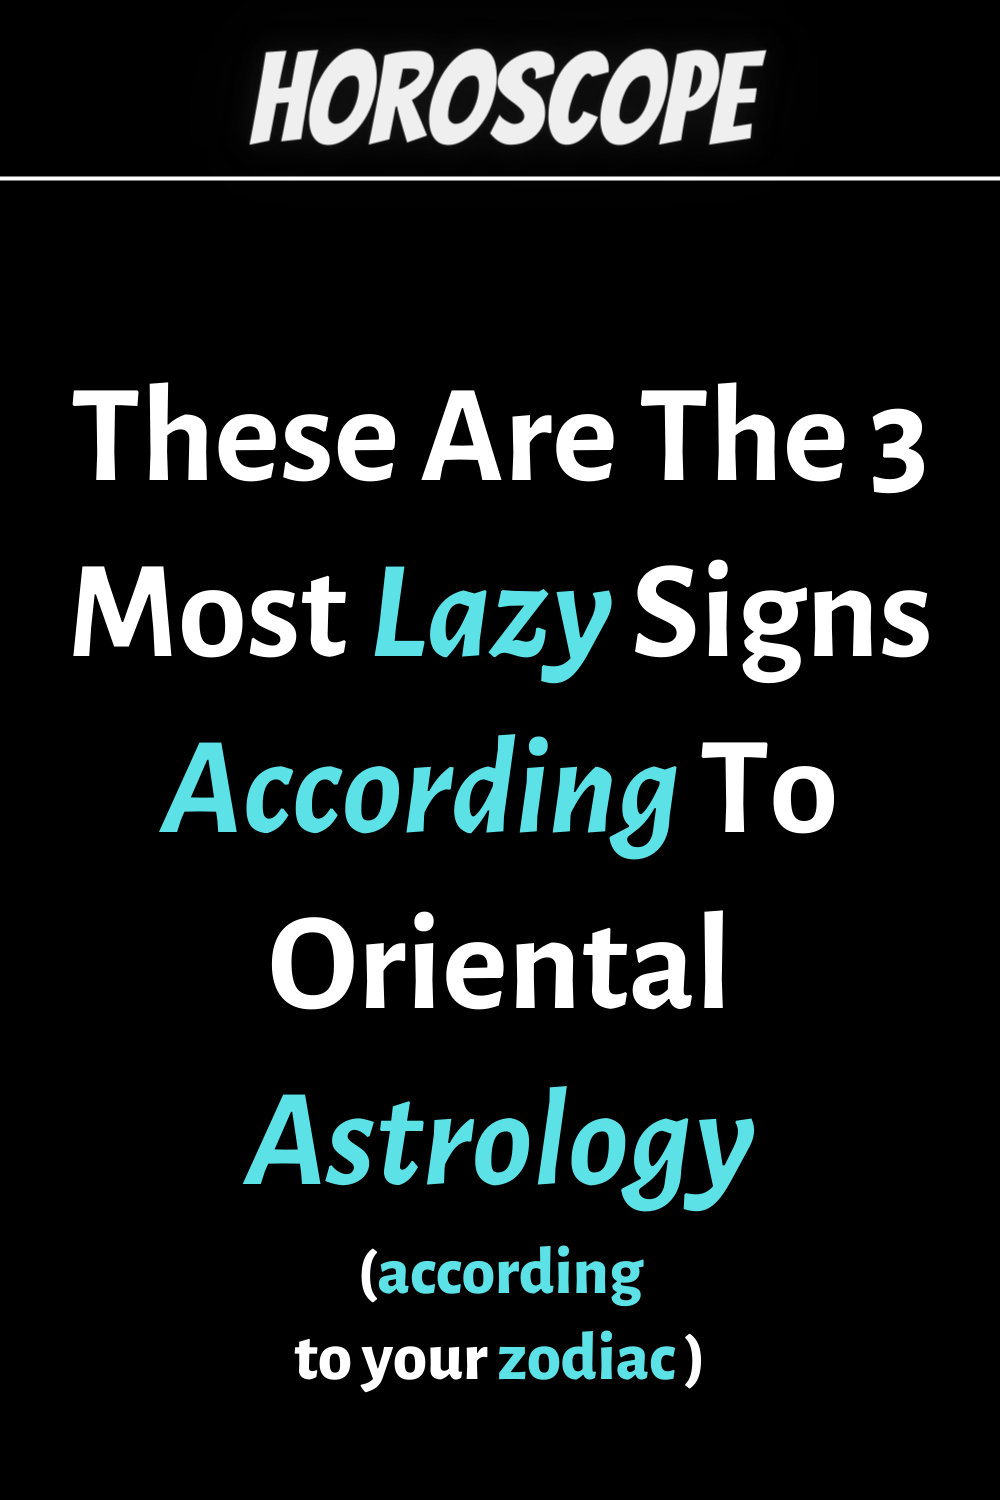 These Are The 3 Most Lazy Signs According To Oriental Astrology